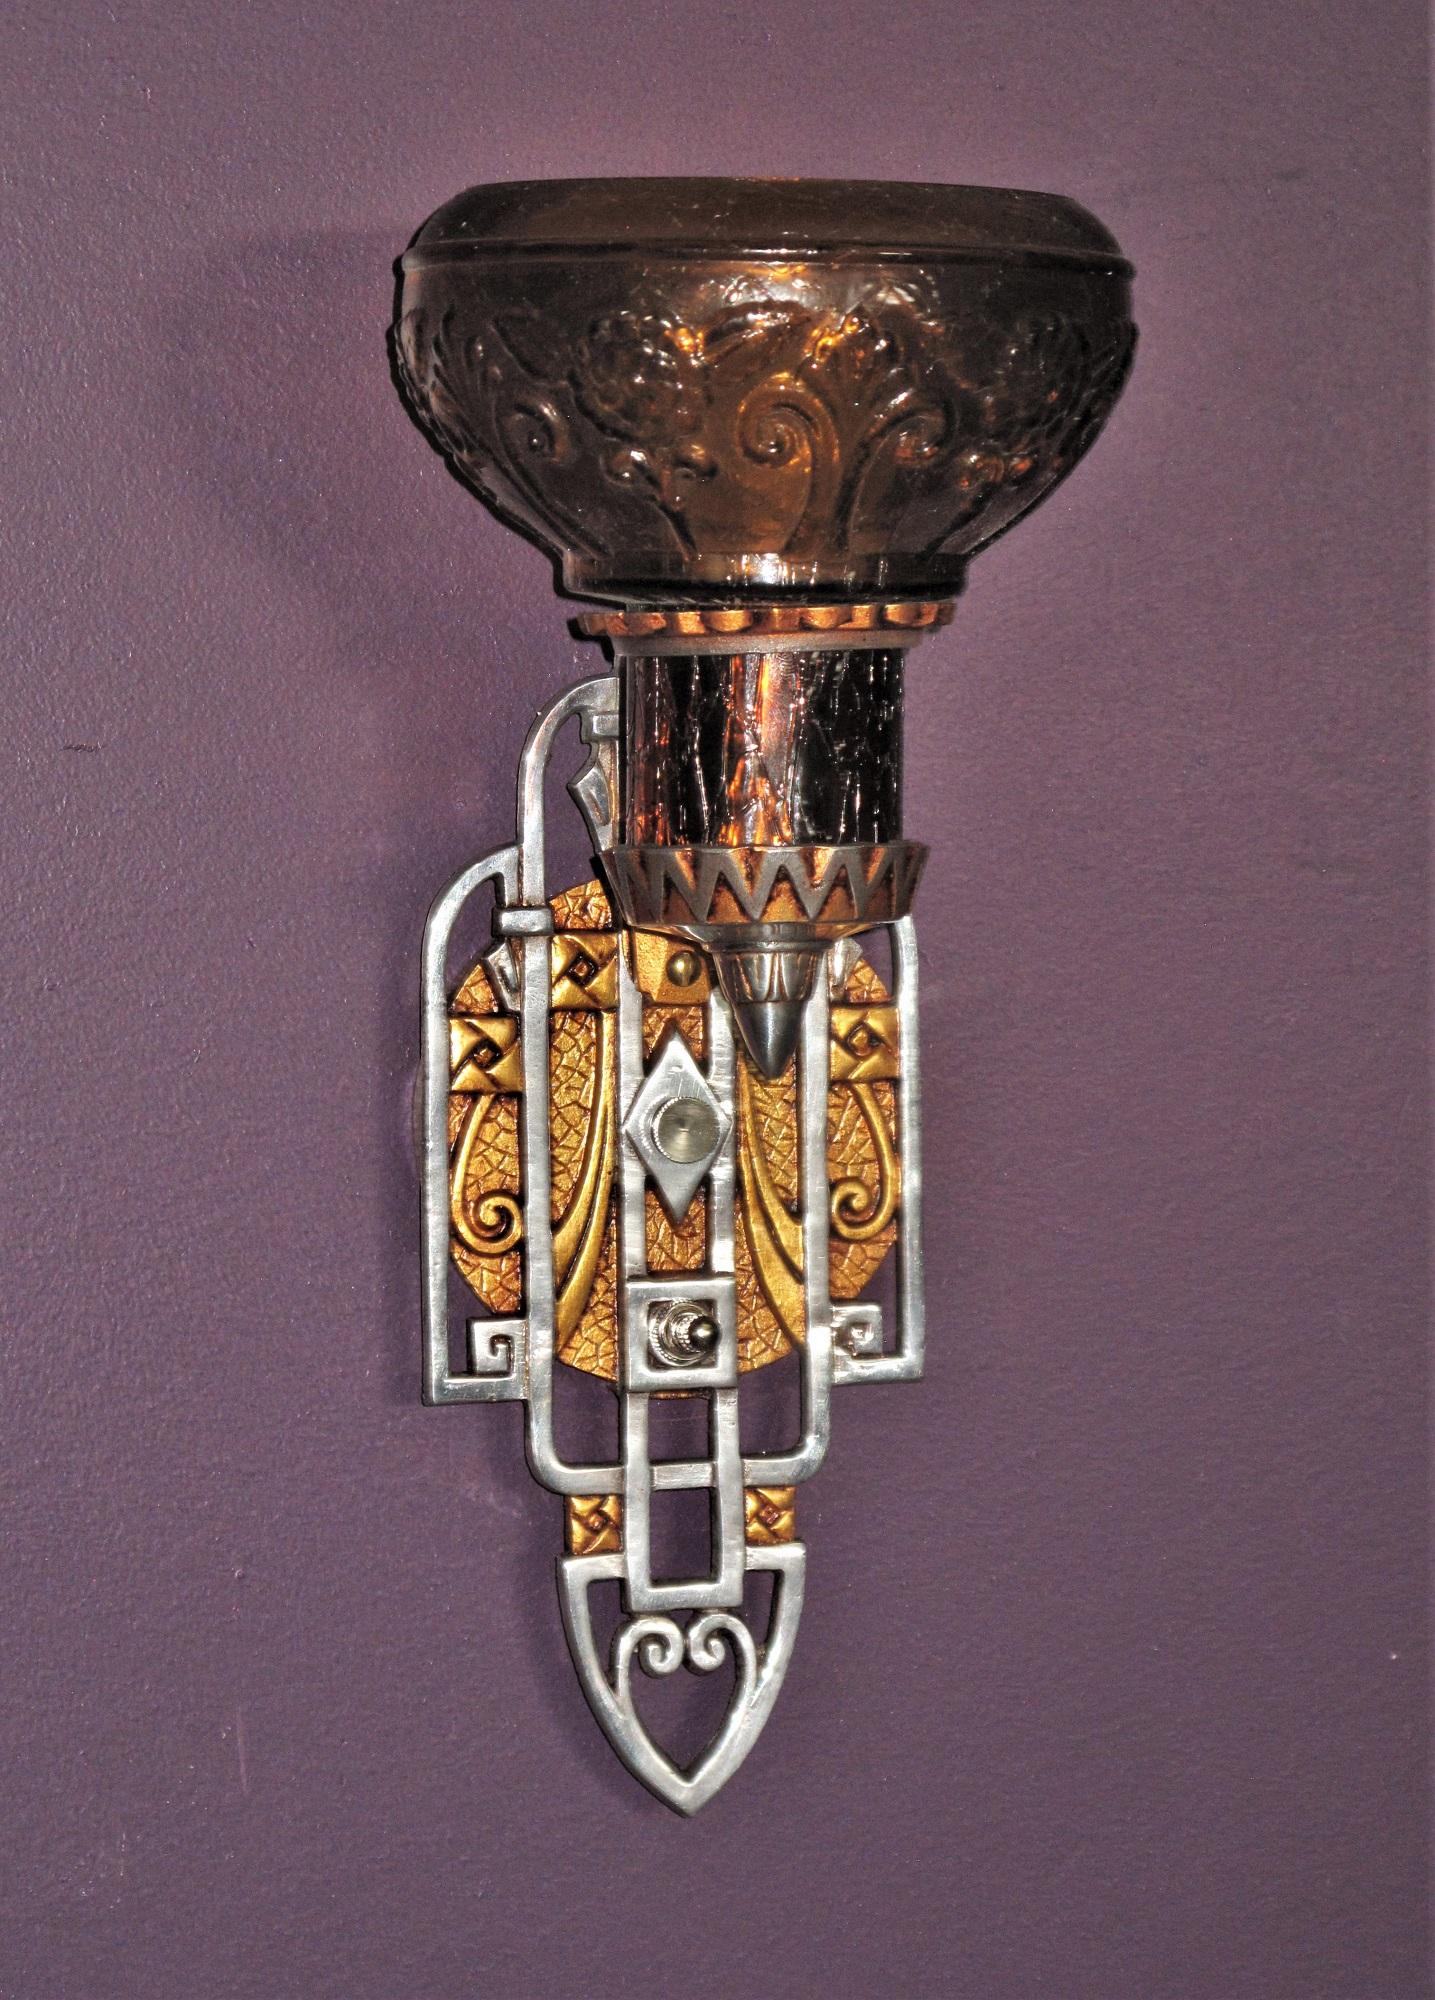 One of the more unique pair of sconces from the period when both Art Deco and Spanish Revival were popular design elements, most likely form the late 20s. Lots of deco inspired designs on the back plate and a Revival inspired glass shade and shade